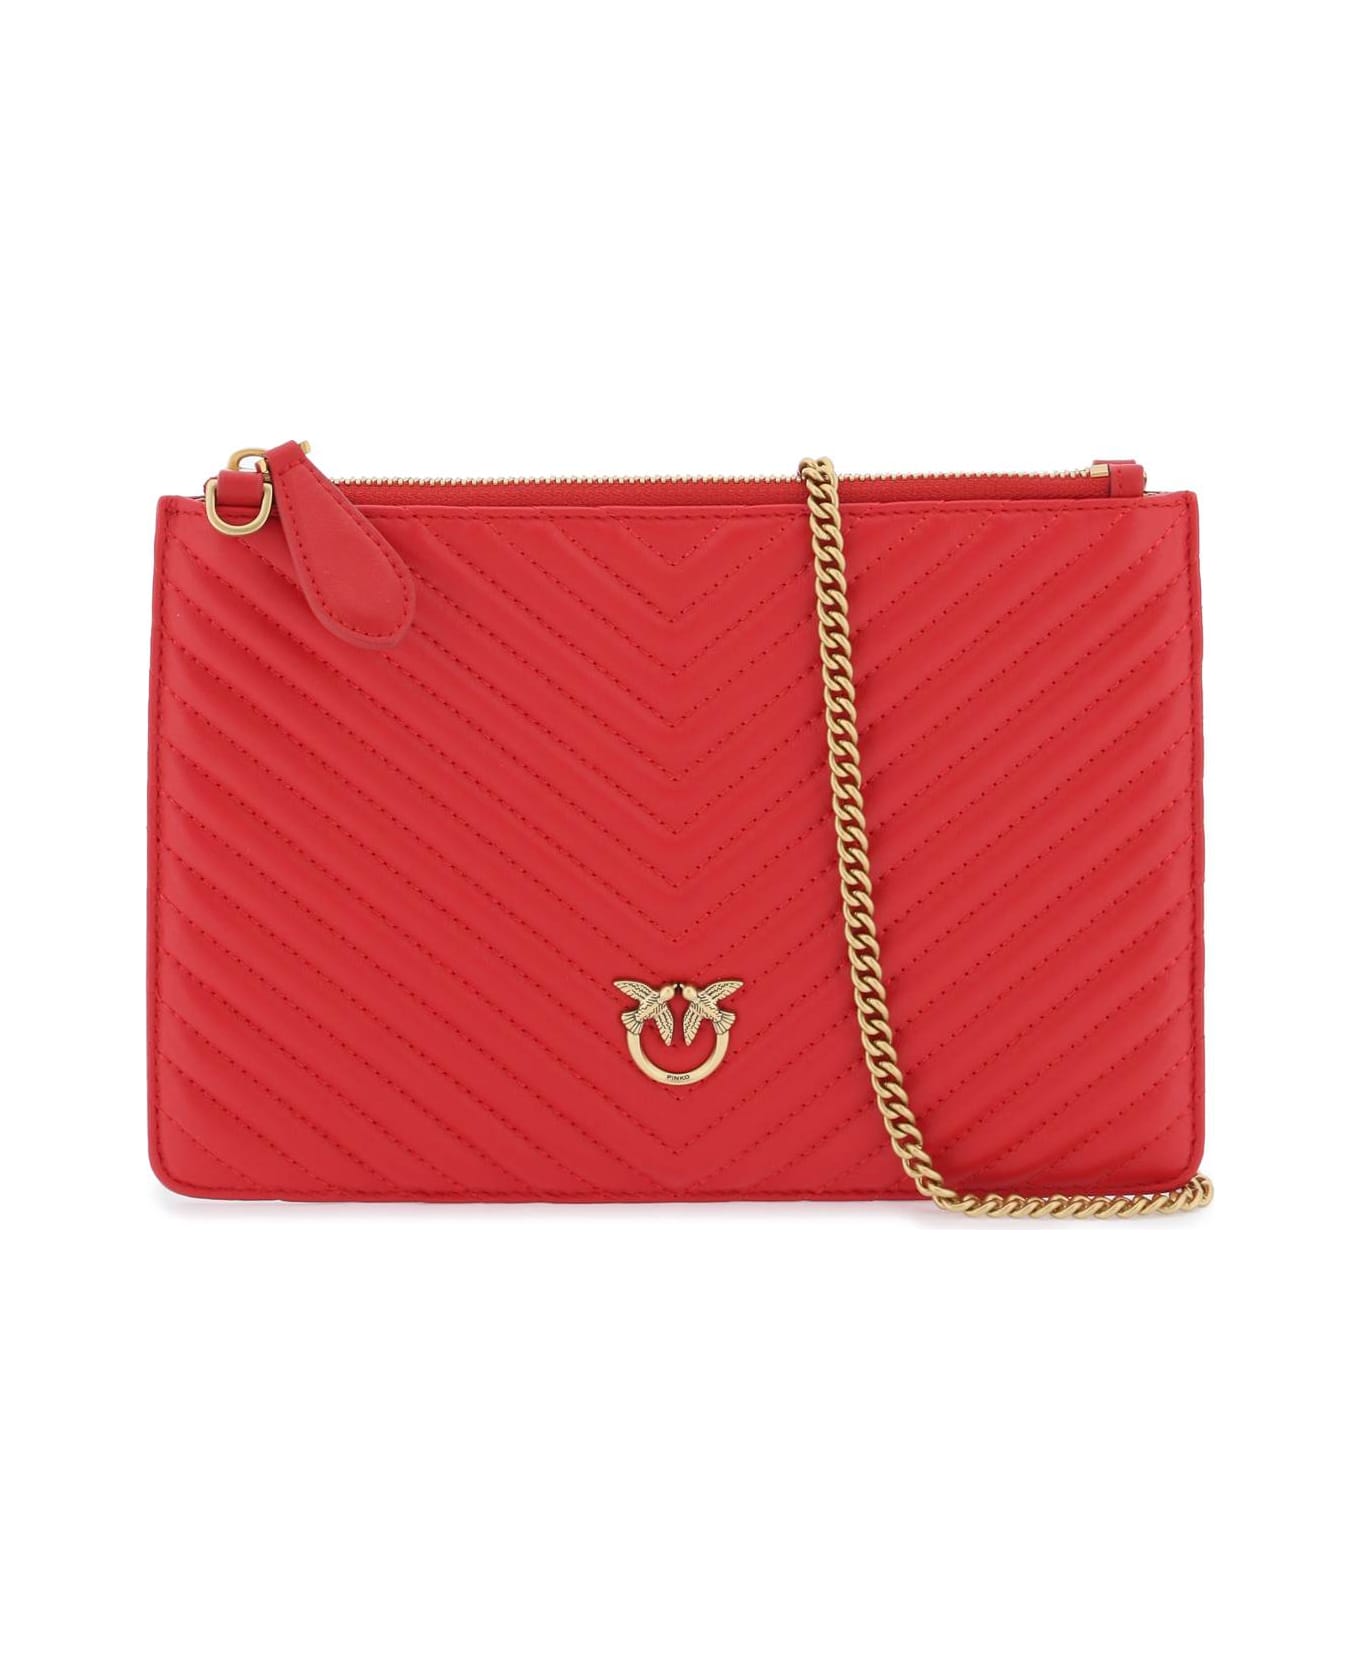 Pinko Classic Flat Love Bag - Rosso-antique Gold